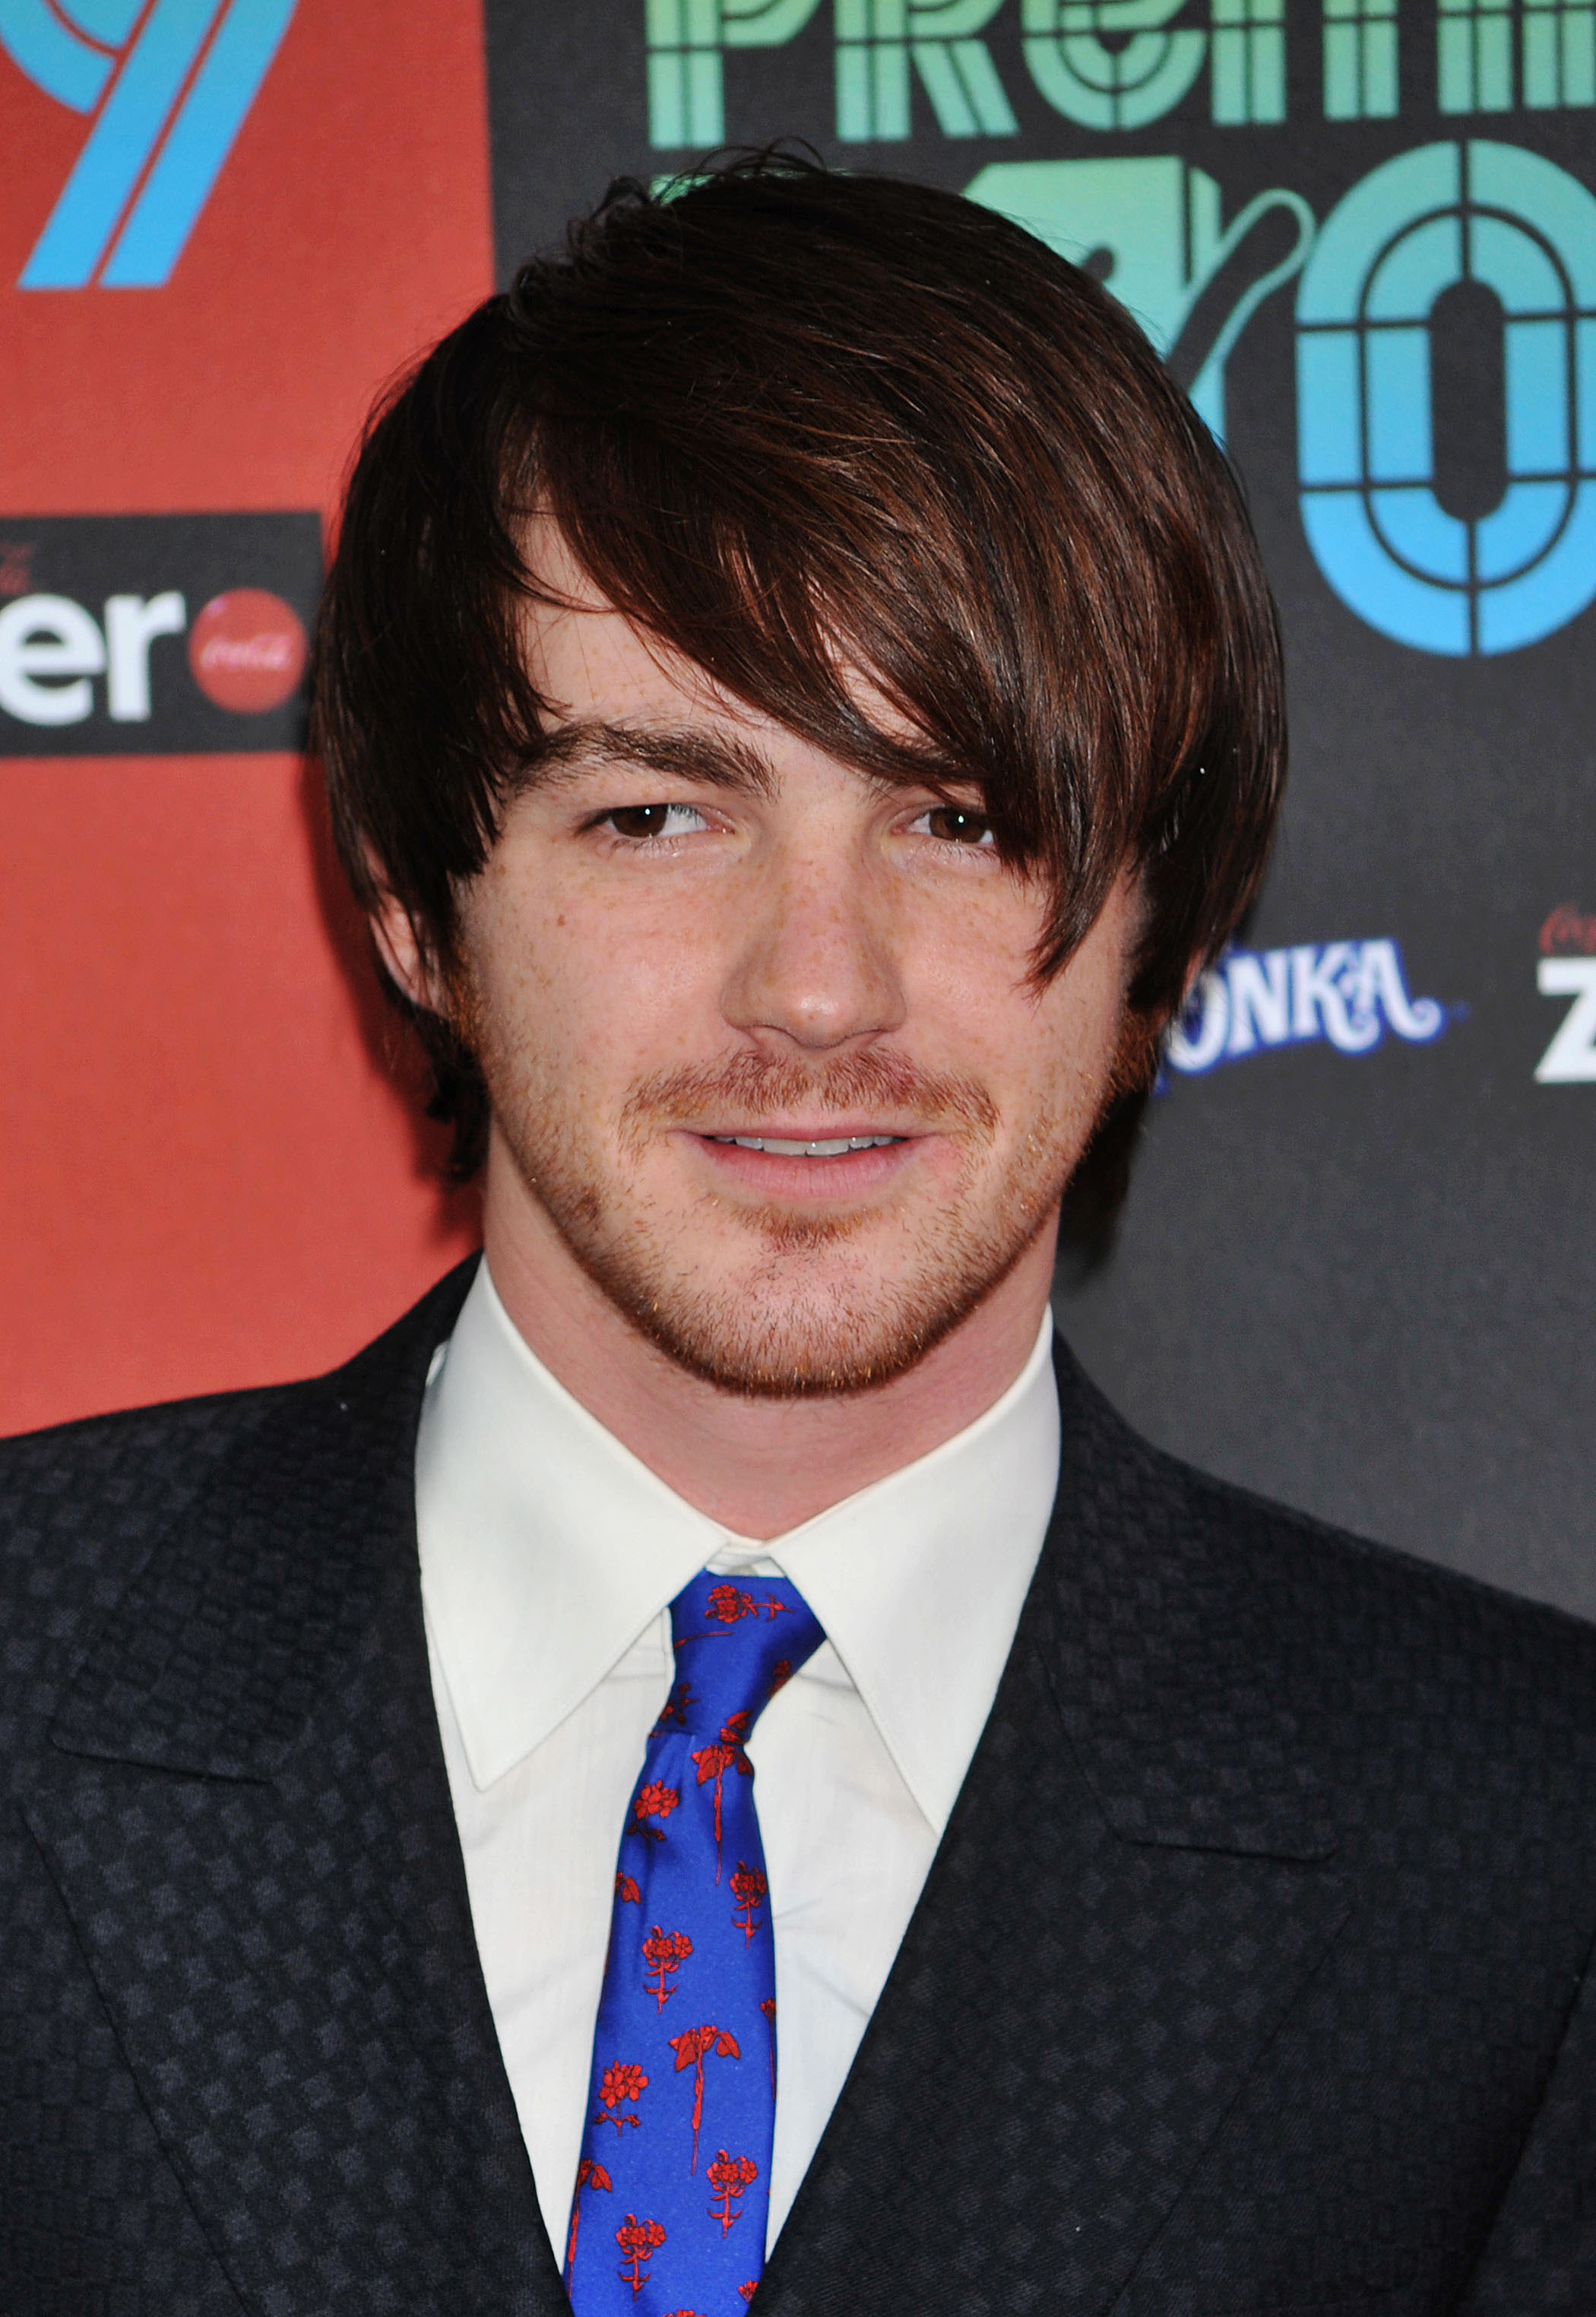 Drake Bell in a suit with a patterned tie, at an event with logos in the background